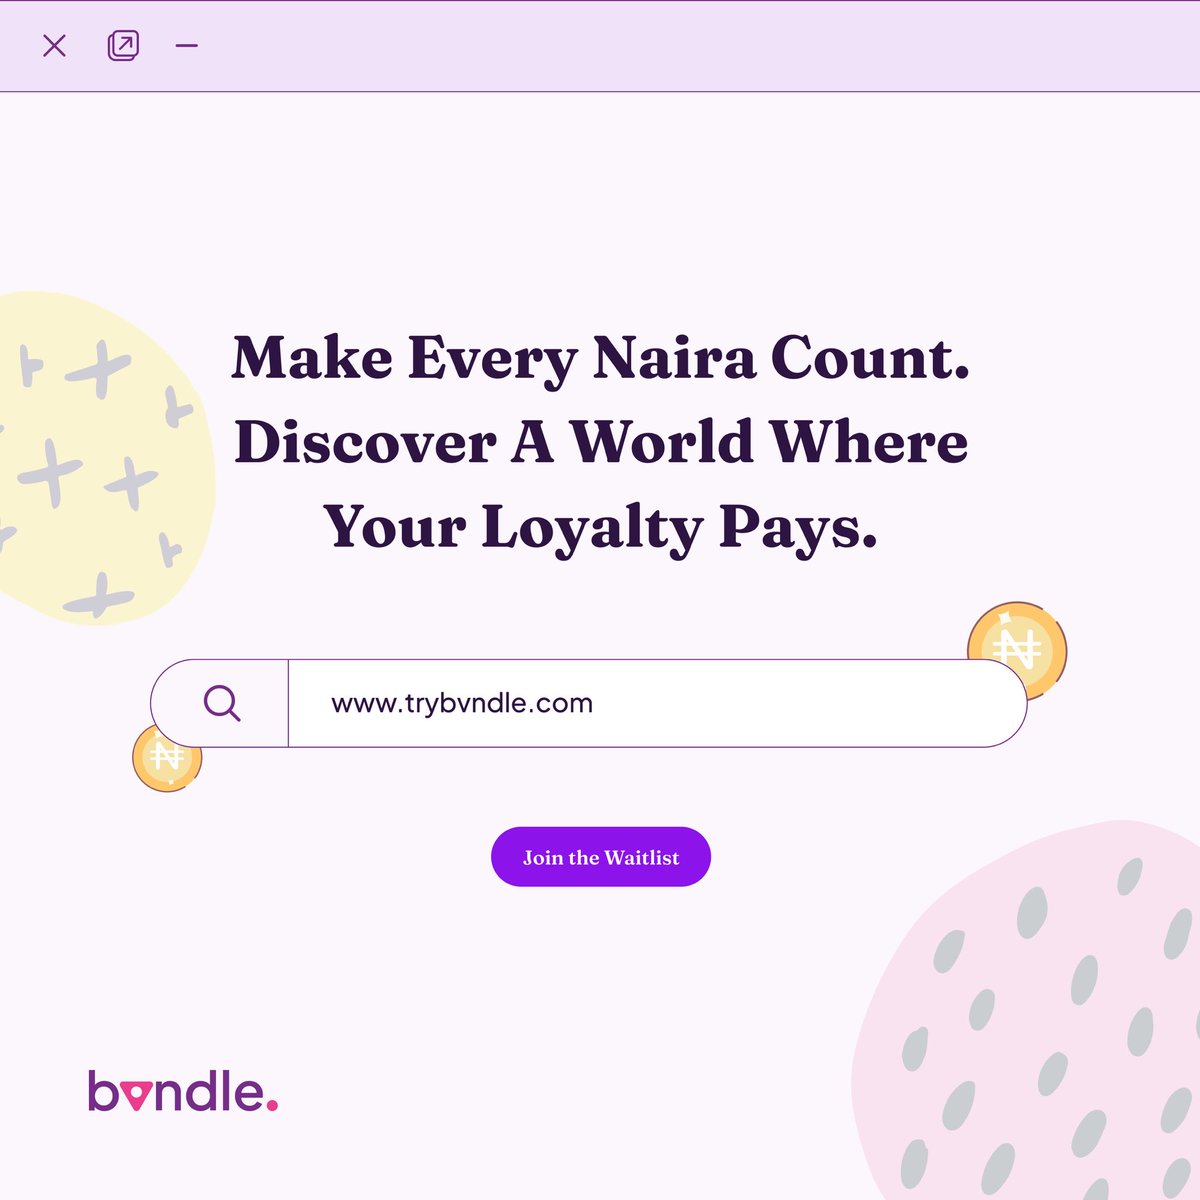 Imagine a world where your spending brings you closer to your dream purchase 🤭 
Say hello to Bvndle - the place where every Naira counts.

Join the Waitlist: trybvndle.com 

Let the reward stacking begin ✨

#TryBvndle #LoyaltyRewards